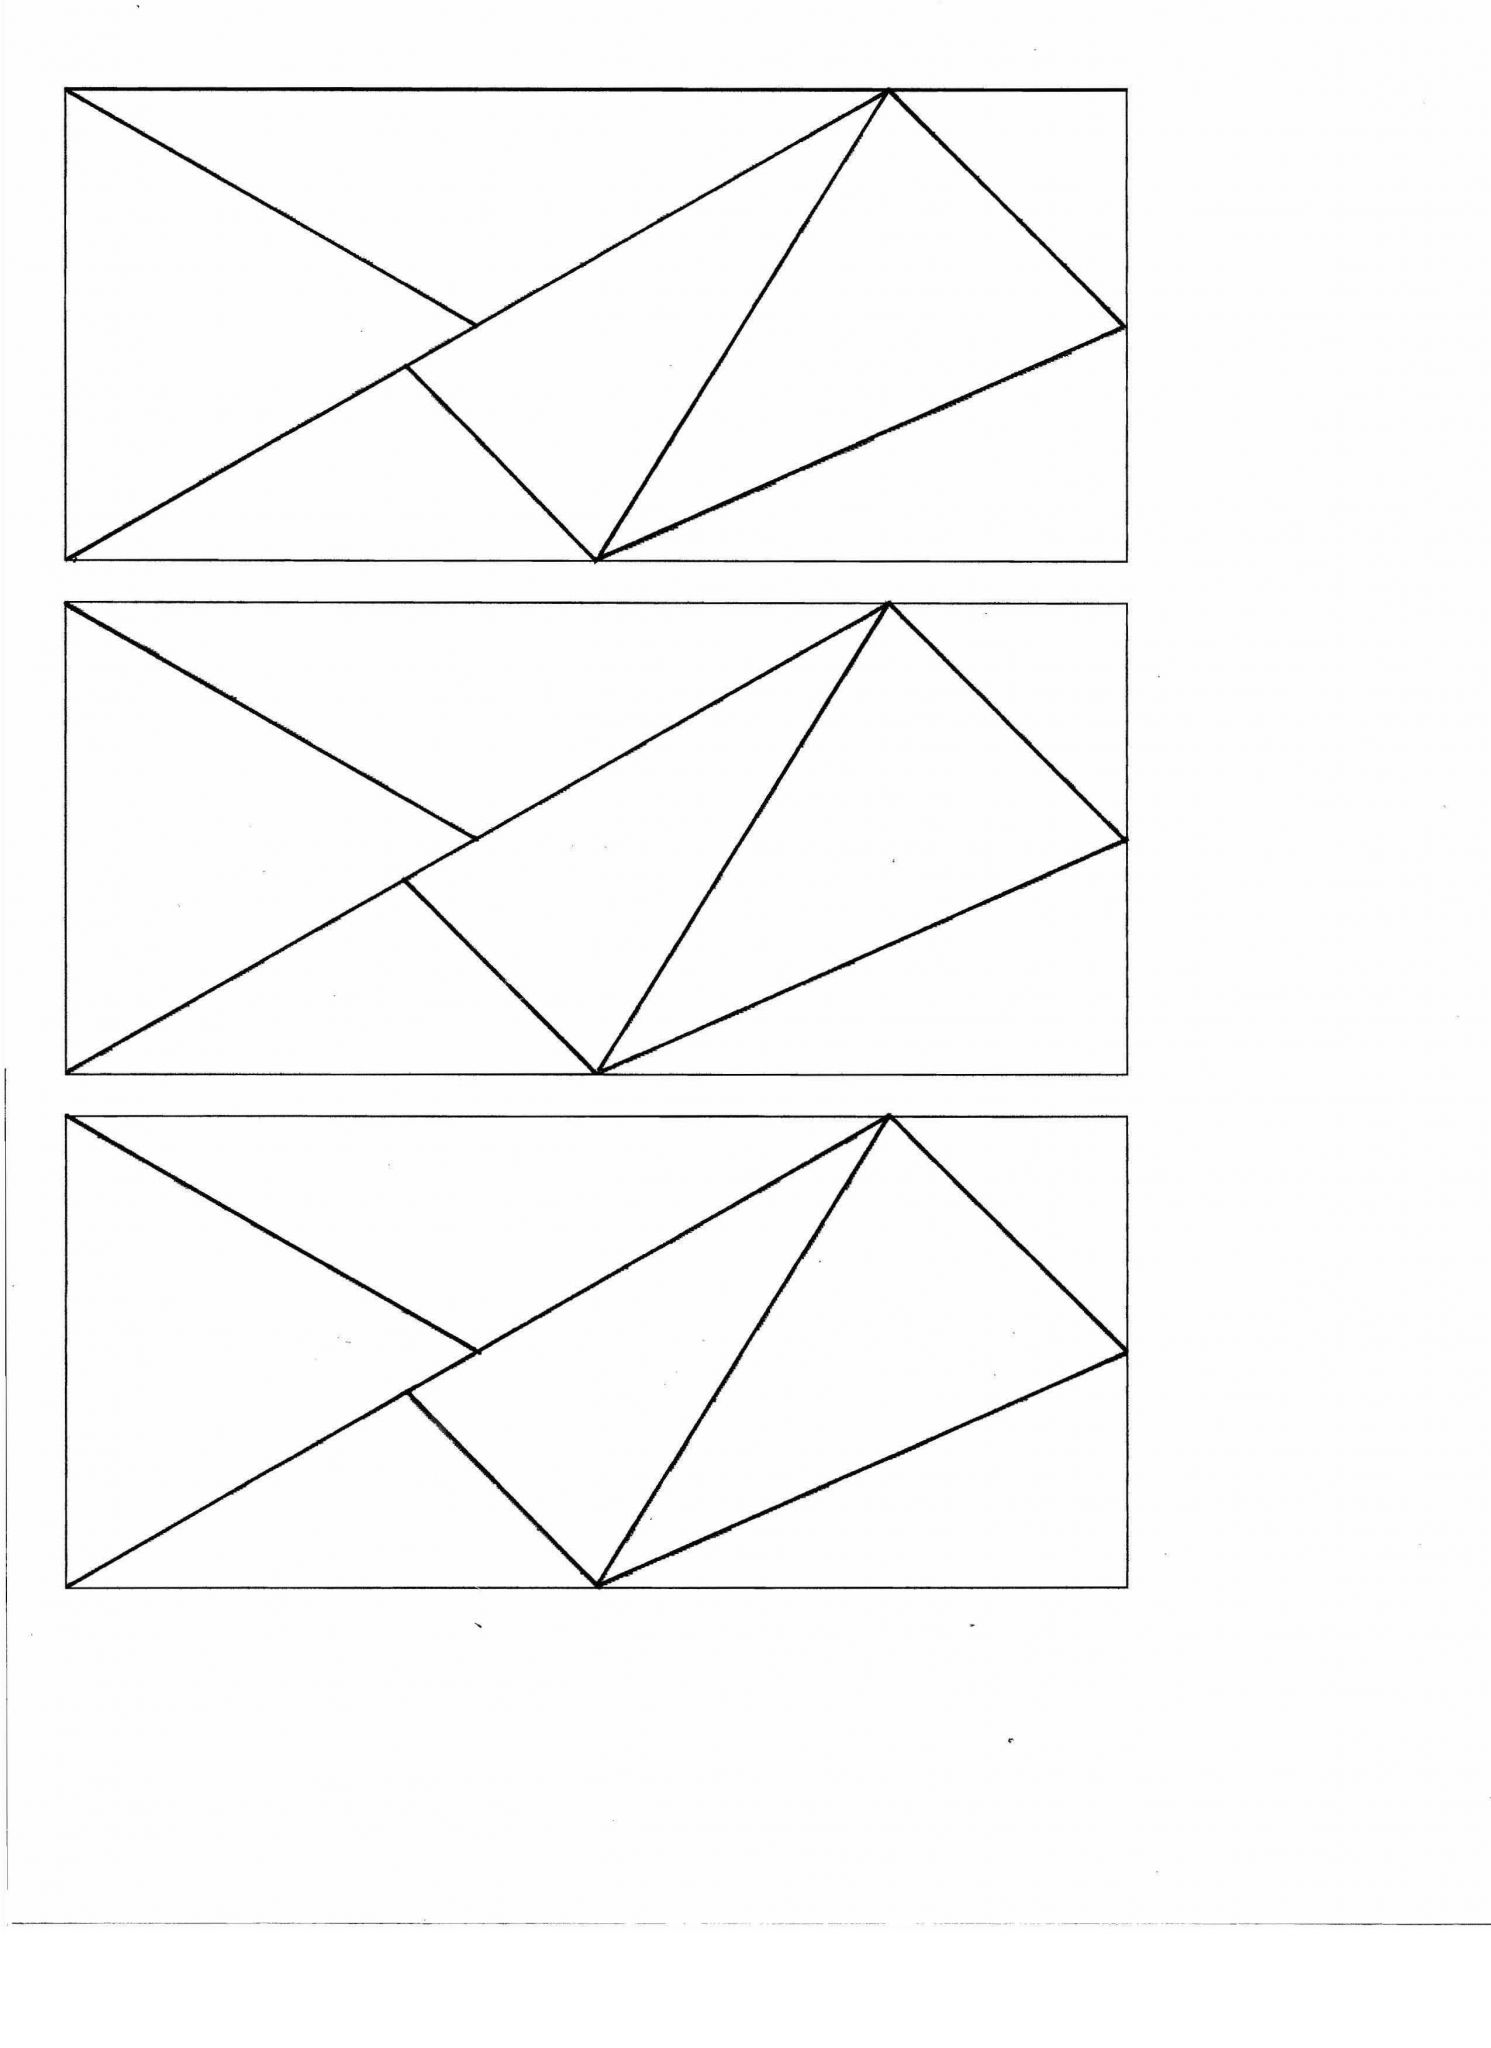 Medians and Centroids Worksheet Answers Also 4 6 isosceles and Equilateral Triangles Worksheet Answers Fresh